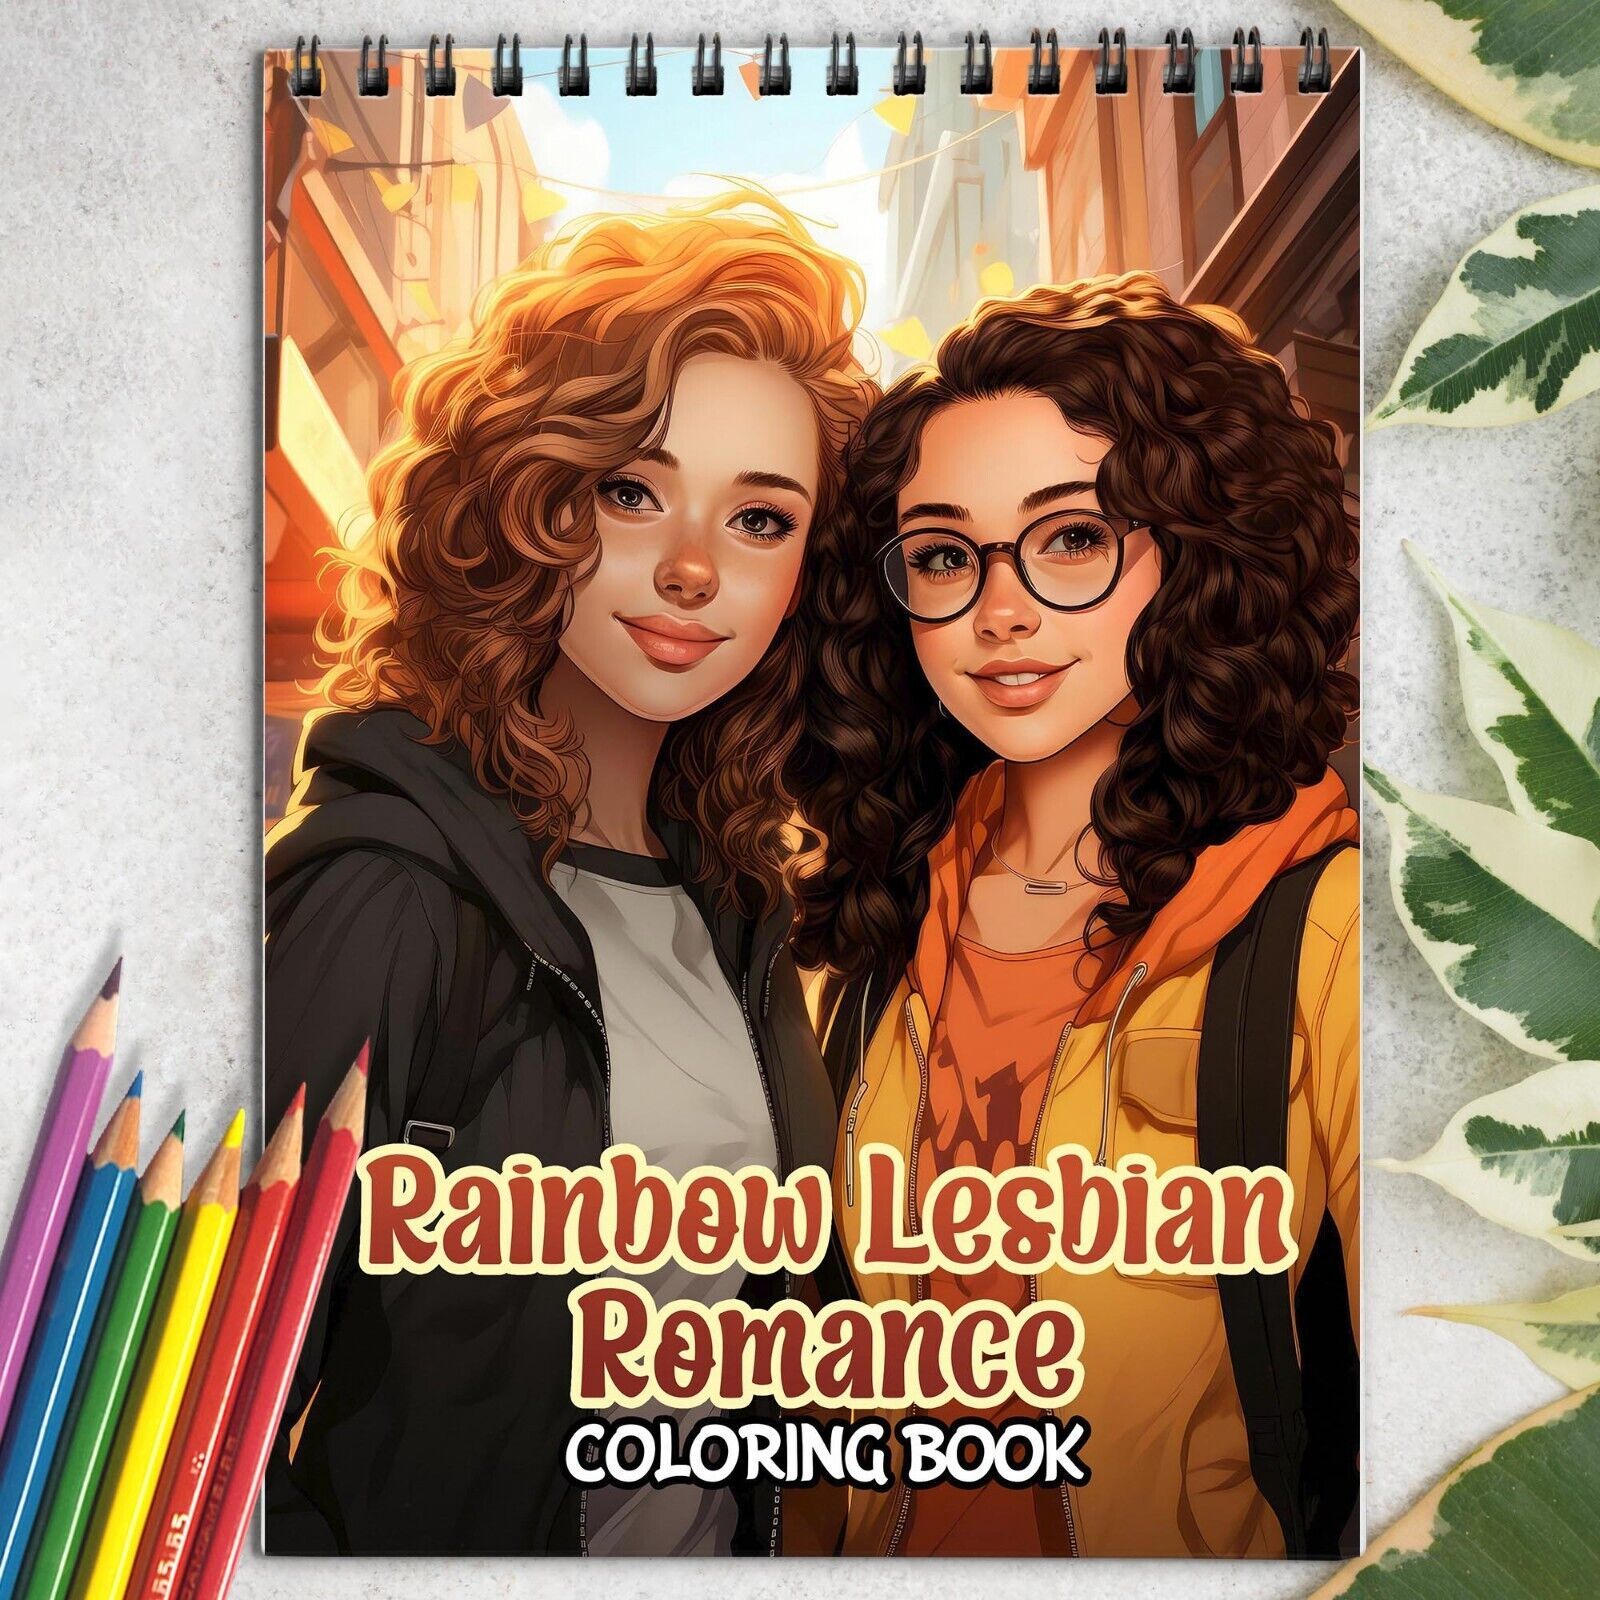 Rainbow Lesbian Romance Spiral-Bound Coloring Book for Adult for Stress Relief - $20.39